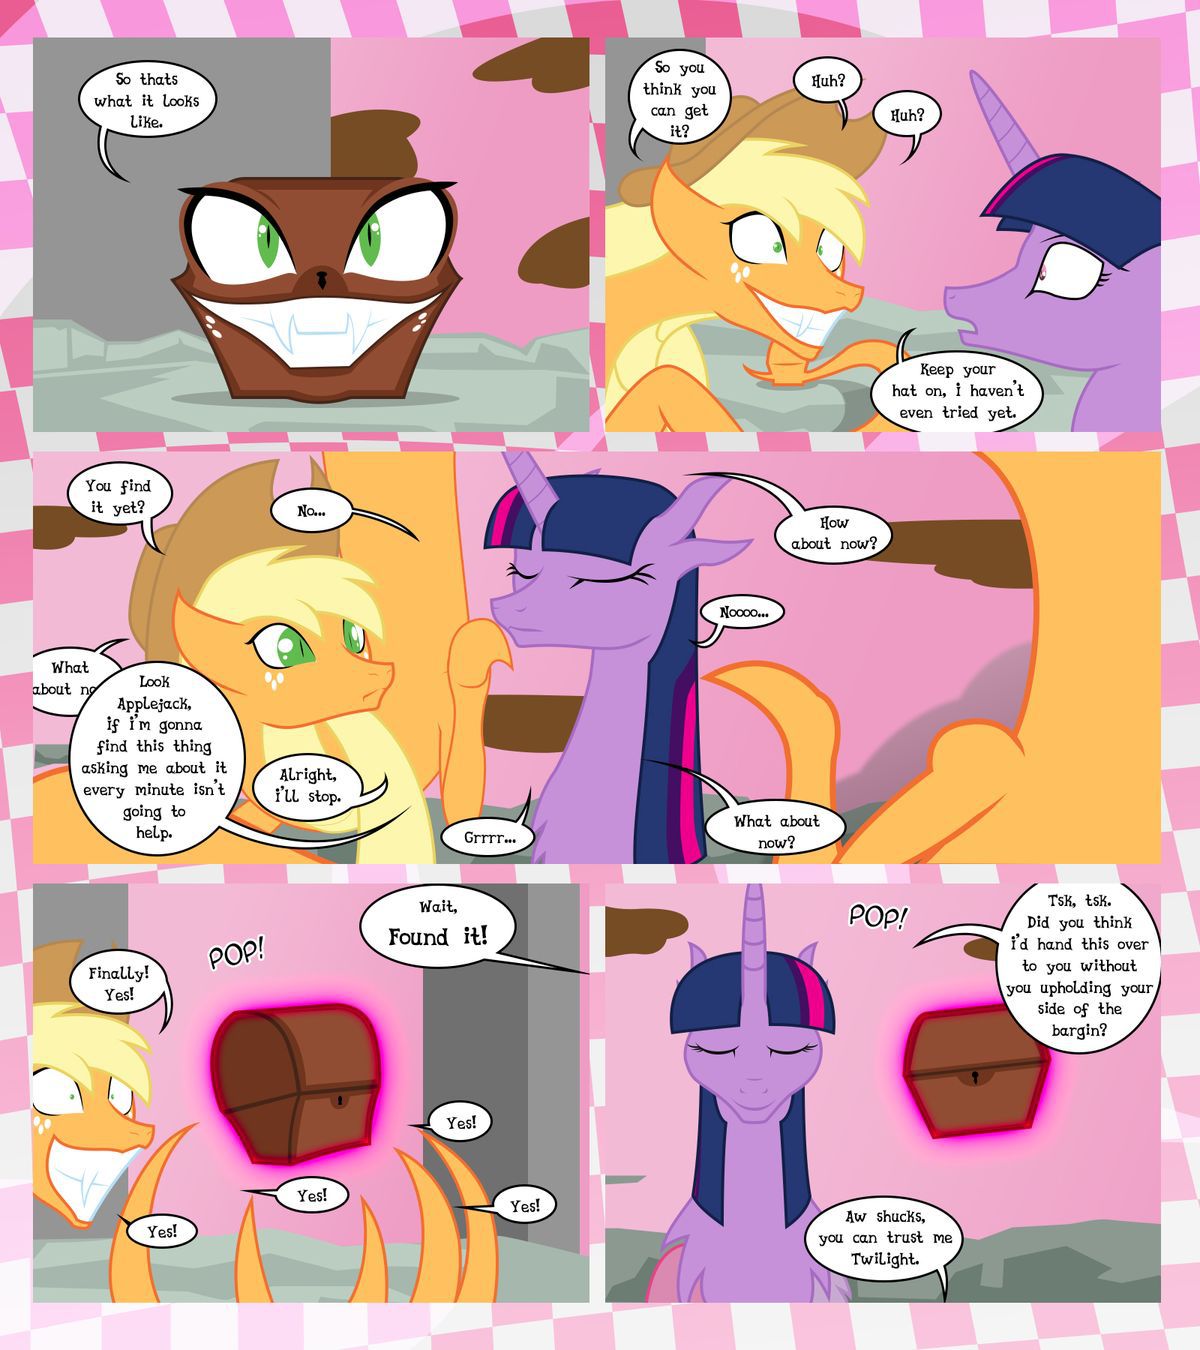 [GatesMcCloud] Cutie Mark Crusaders 10k: Chapter 3 - The Lost (My Little Pony: Friendship is Magic) [English] [Ongoing] 55